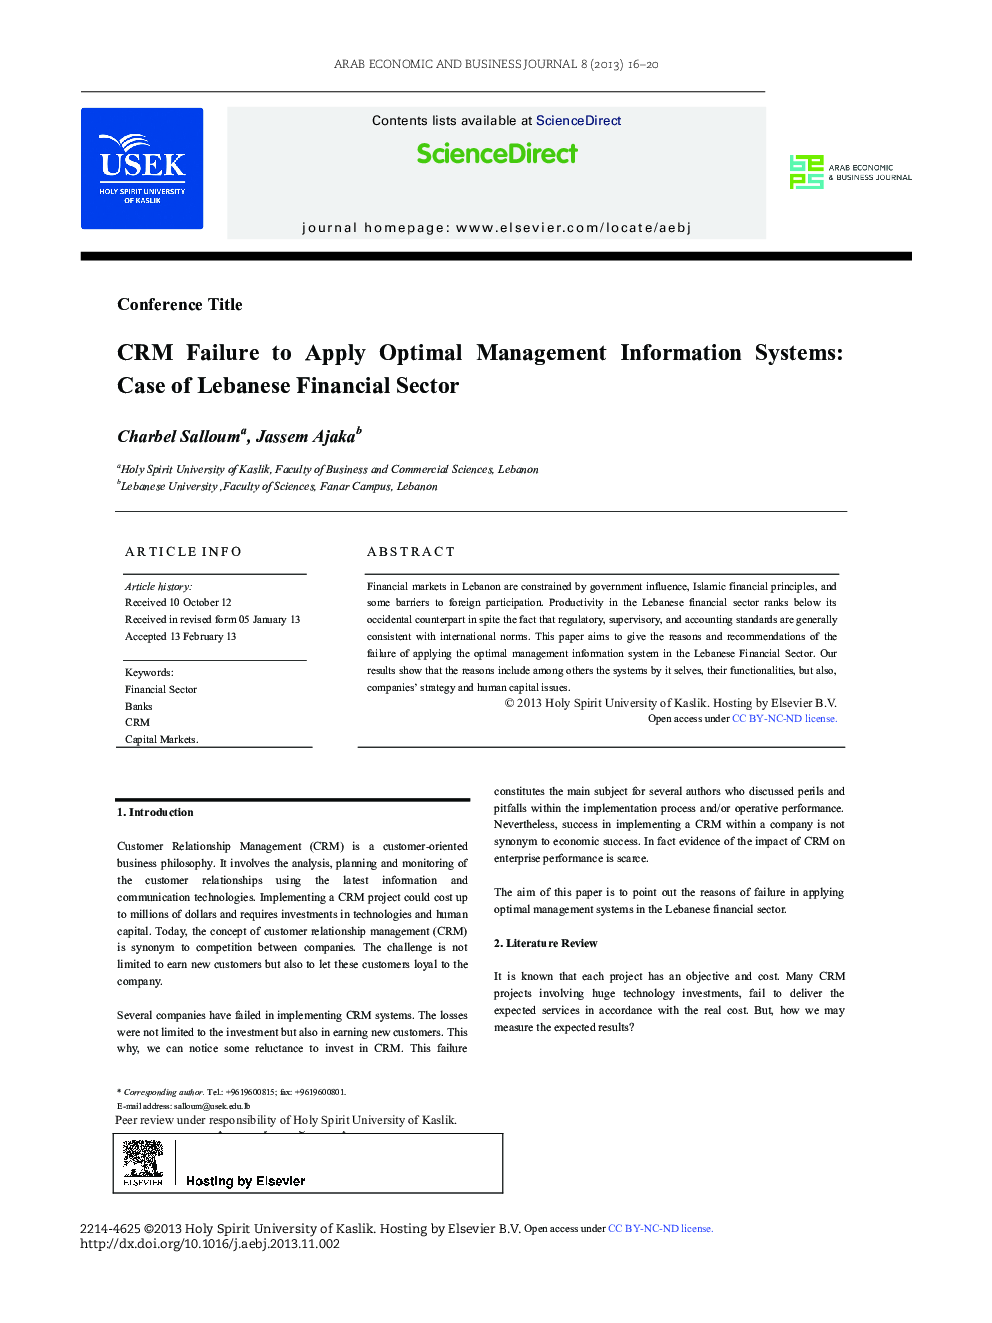 CRM Failure to Apply Optimal Management Information Systems: Case of Lebanese Financial Sector 